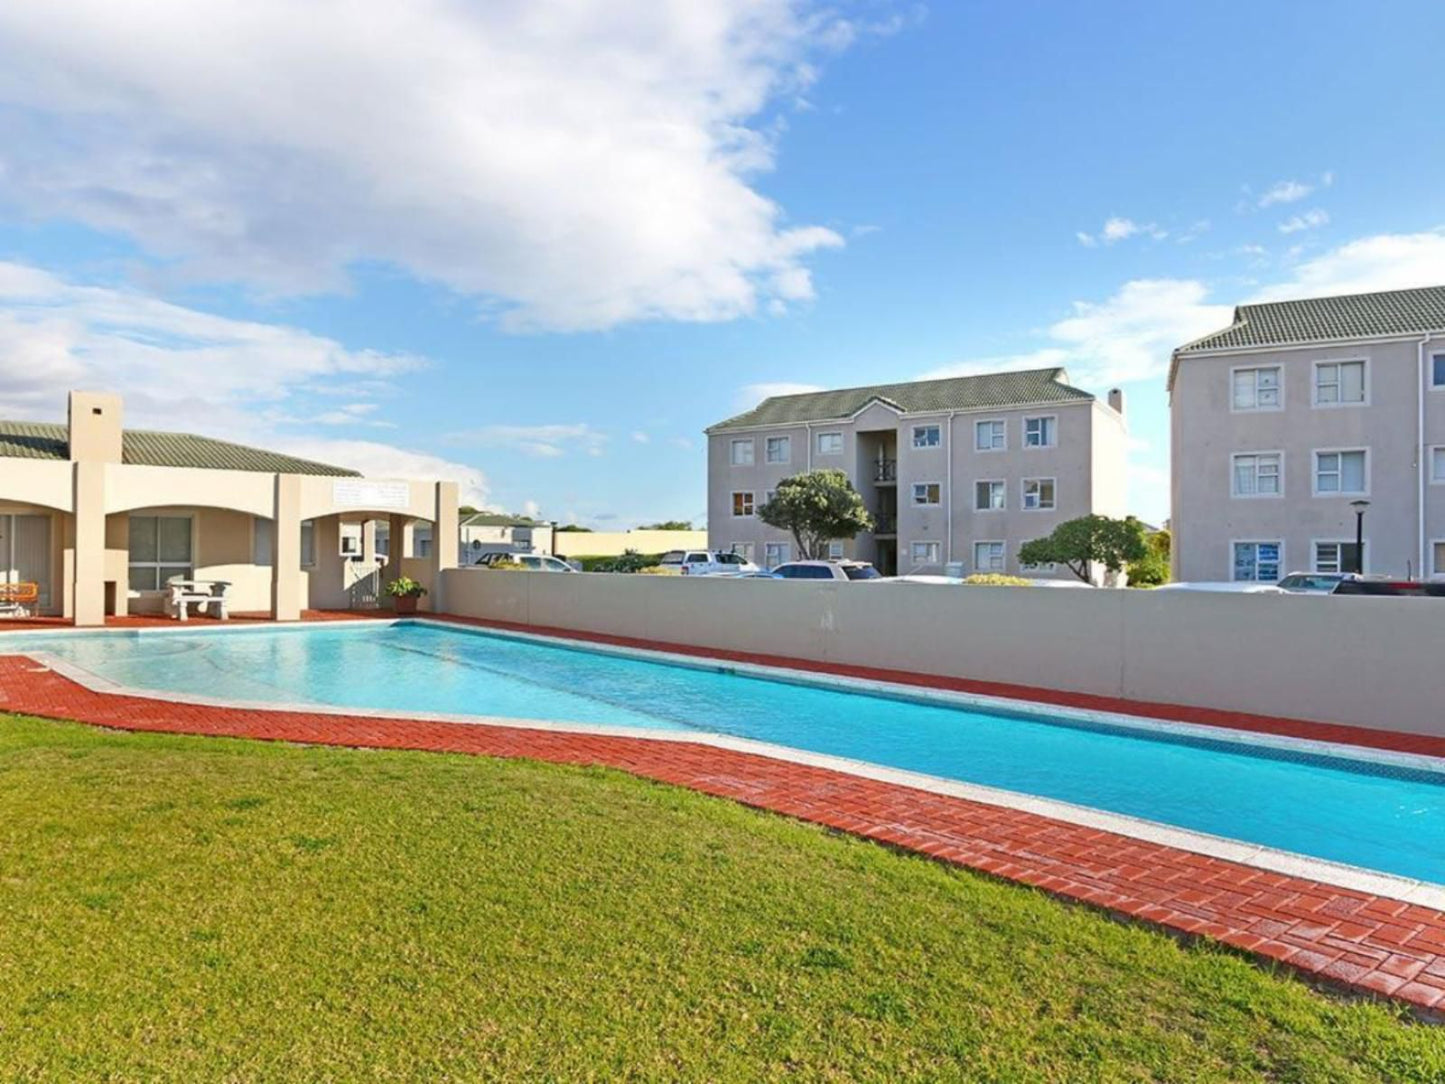 Big Bay Beach Club 21 By Hostagents Big Bay Blouberg Western Cape South Africa Complementary Colors, House, Building, Architecture, Swimming Pool